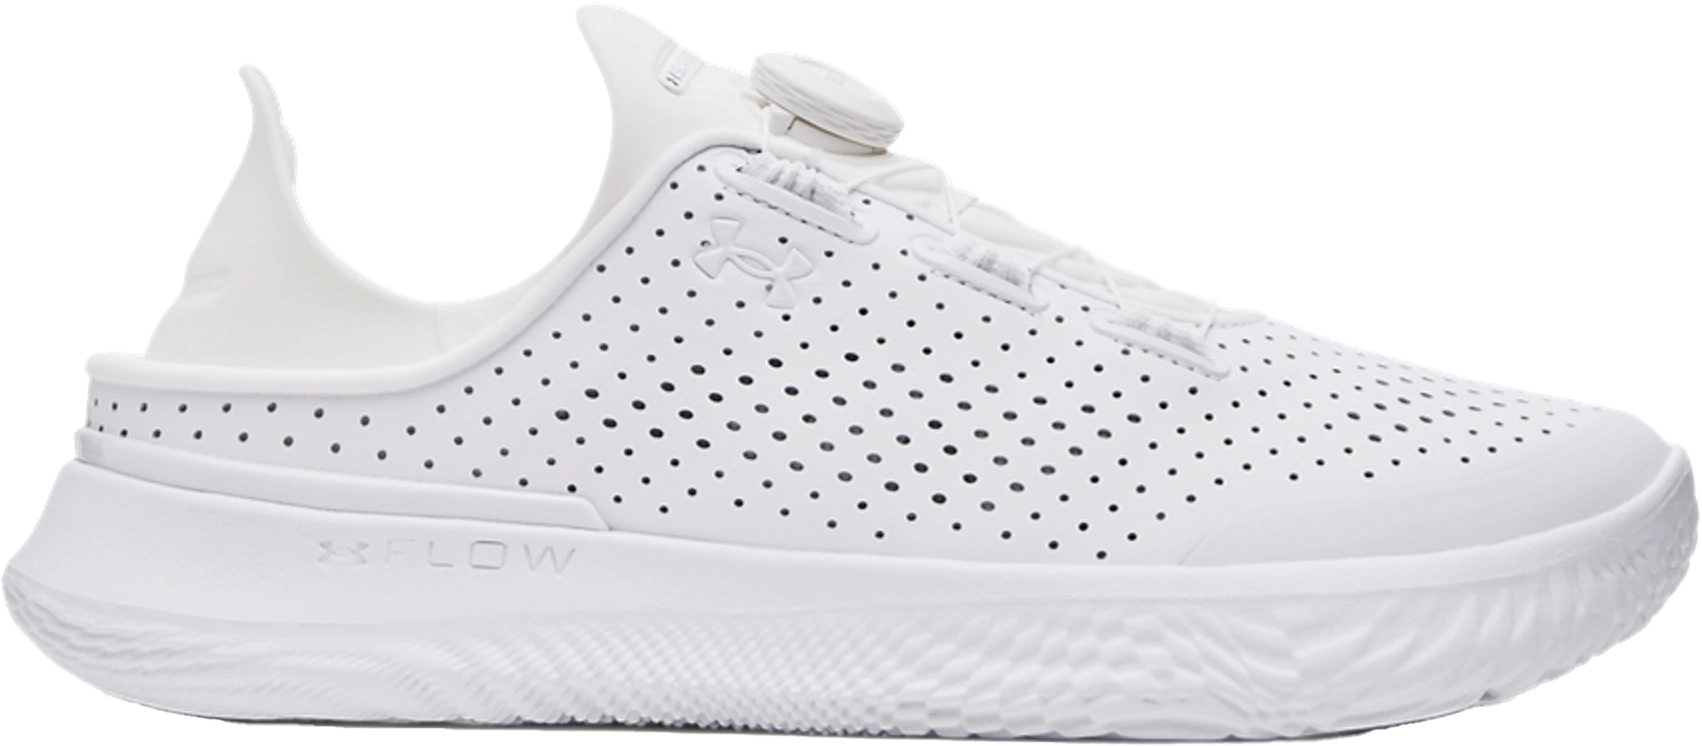 Fitness shoes Under Armour UA Slipspeed Trainer SYN-WHT